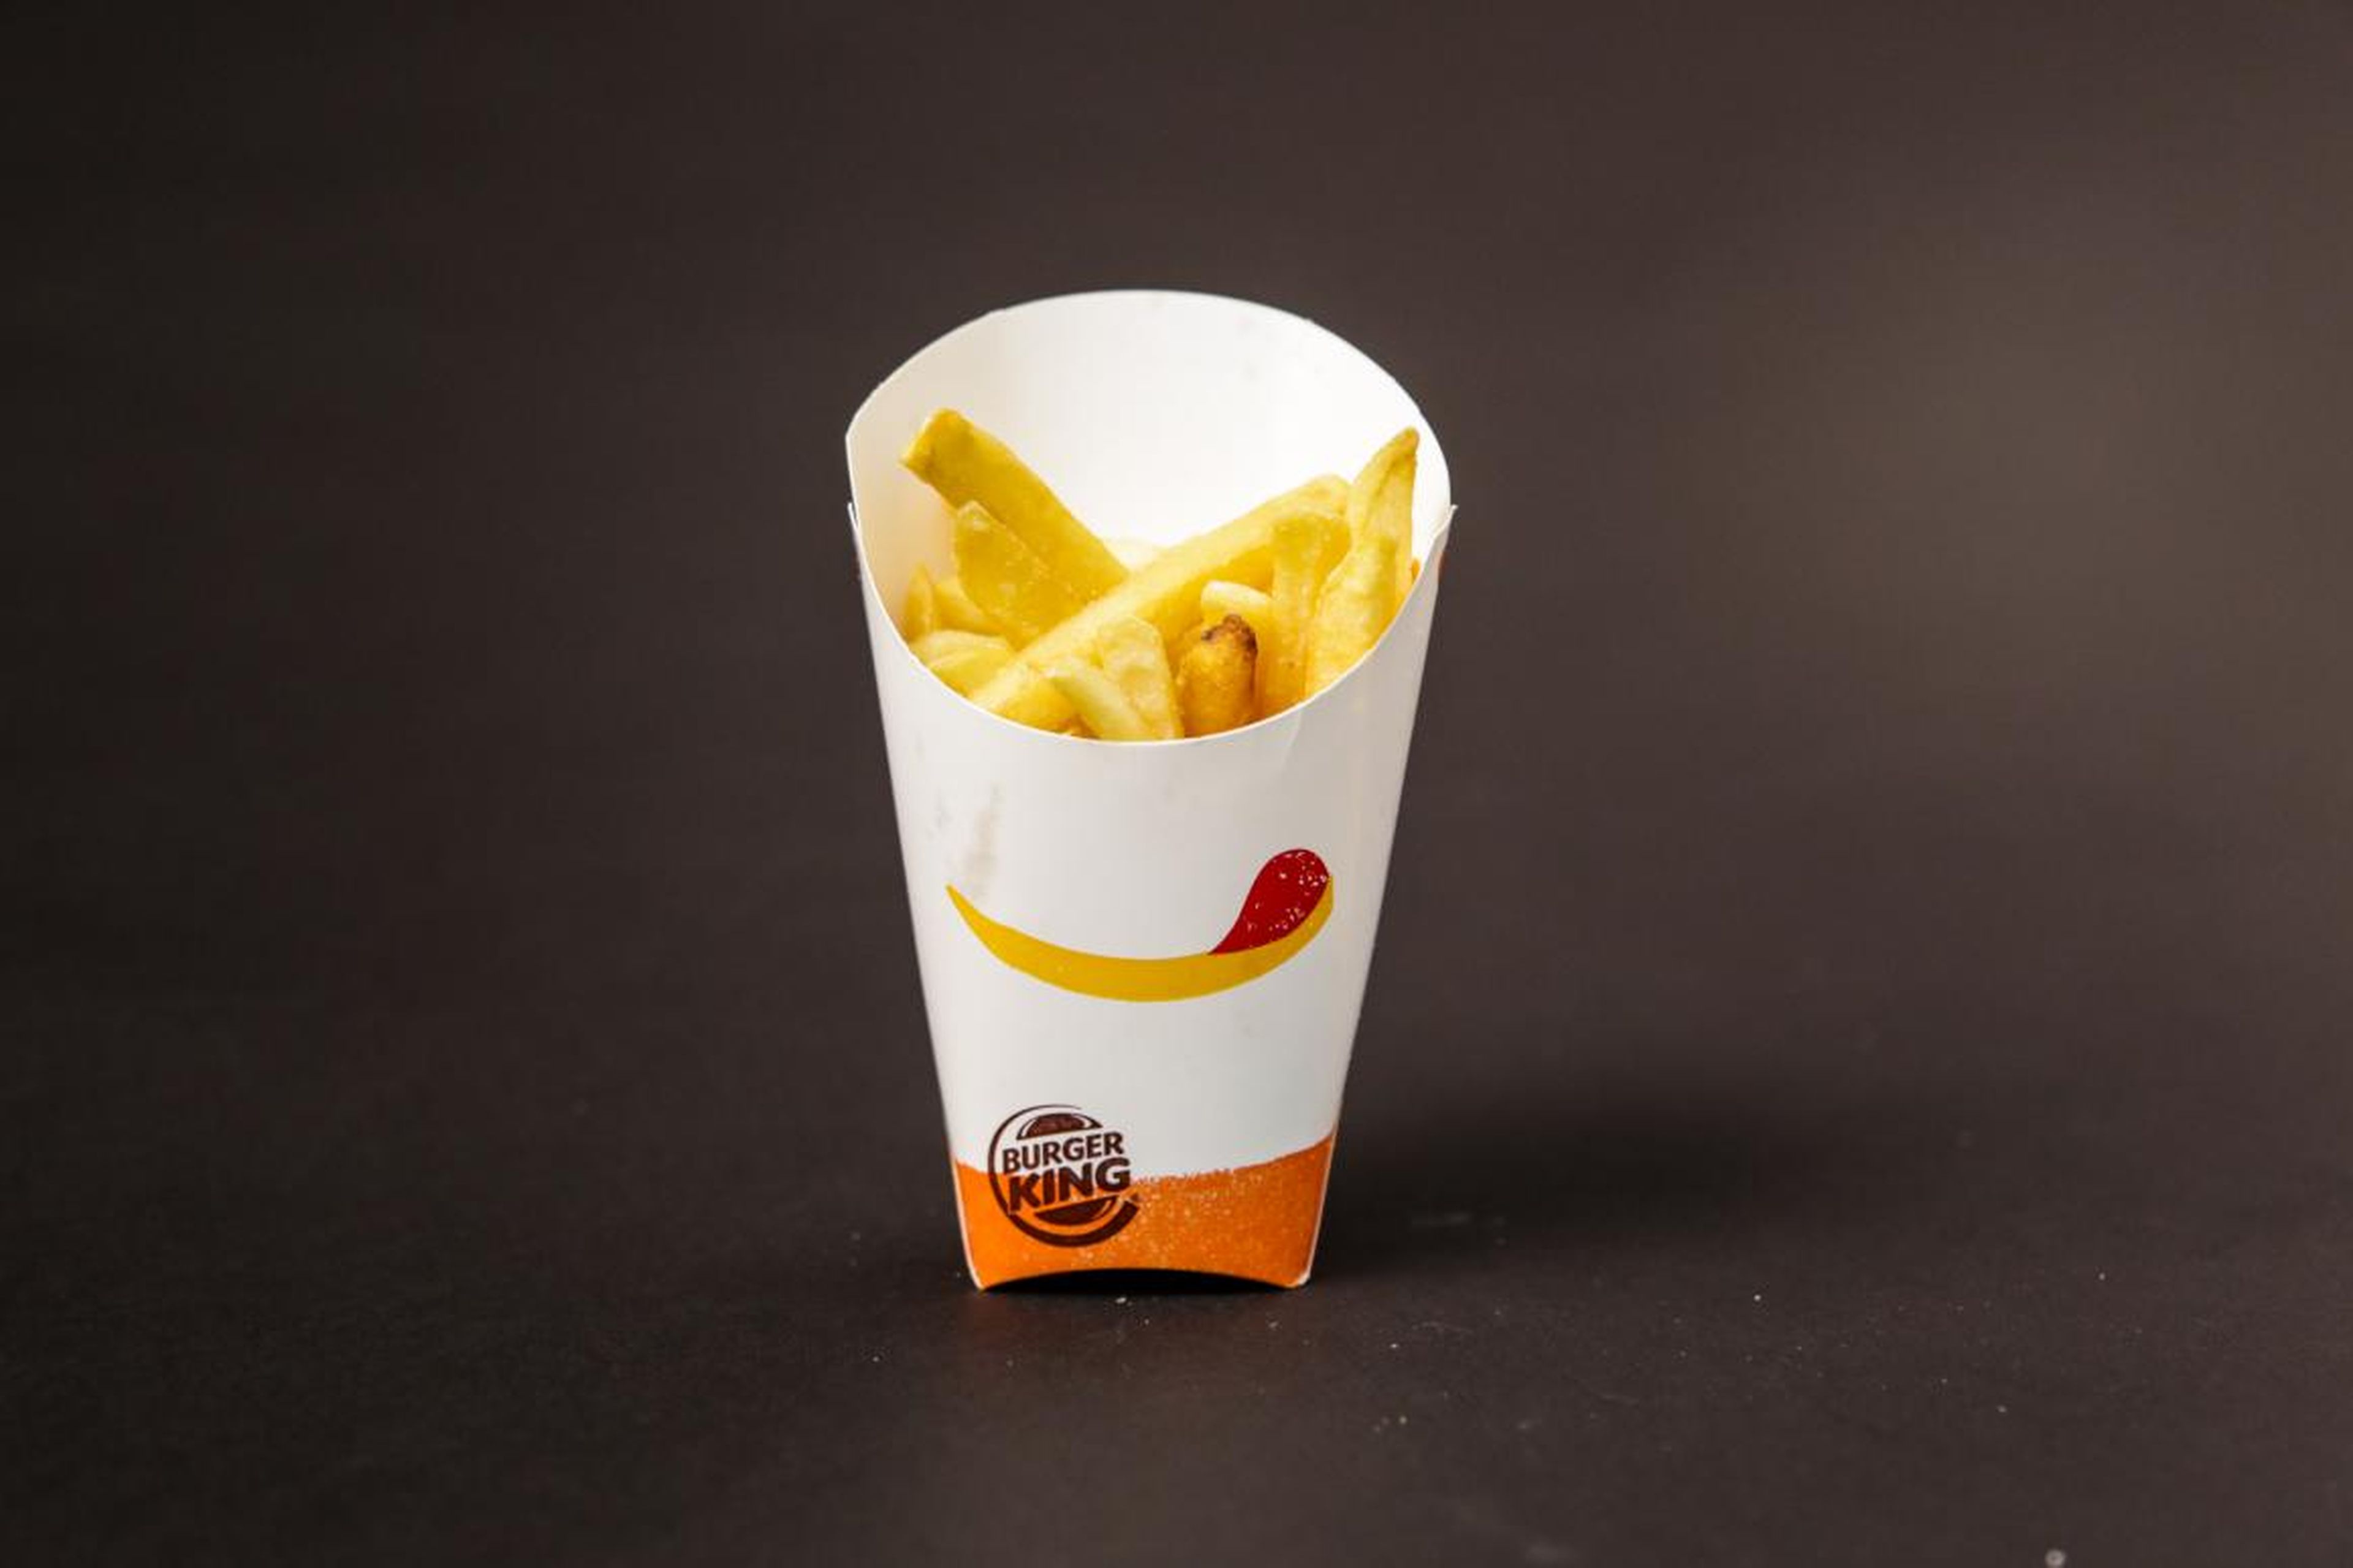 Burger King is beloved by its subjects not for its fries, but for its outrageous style.